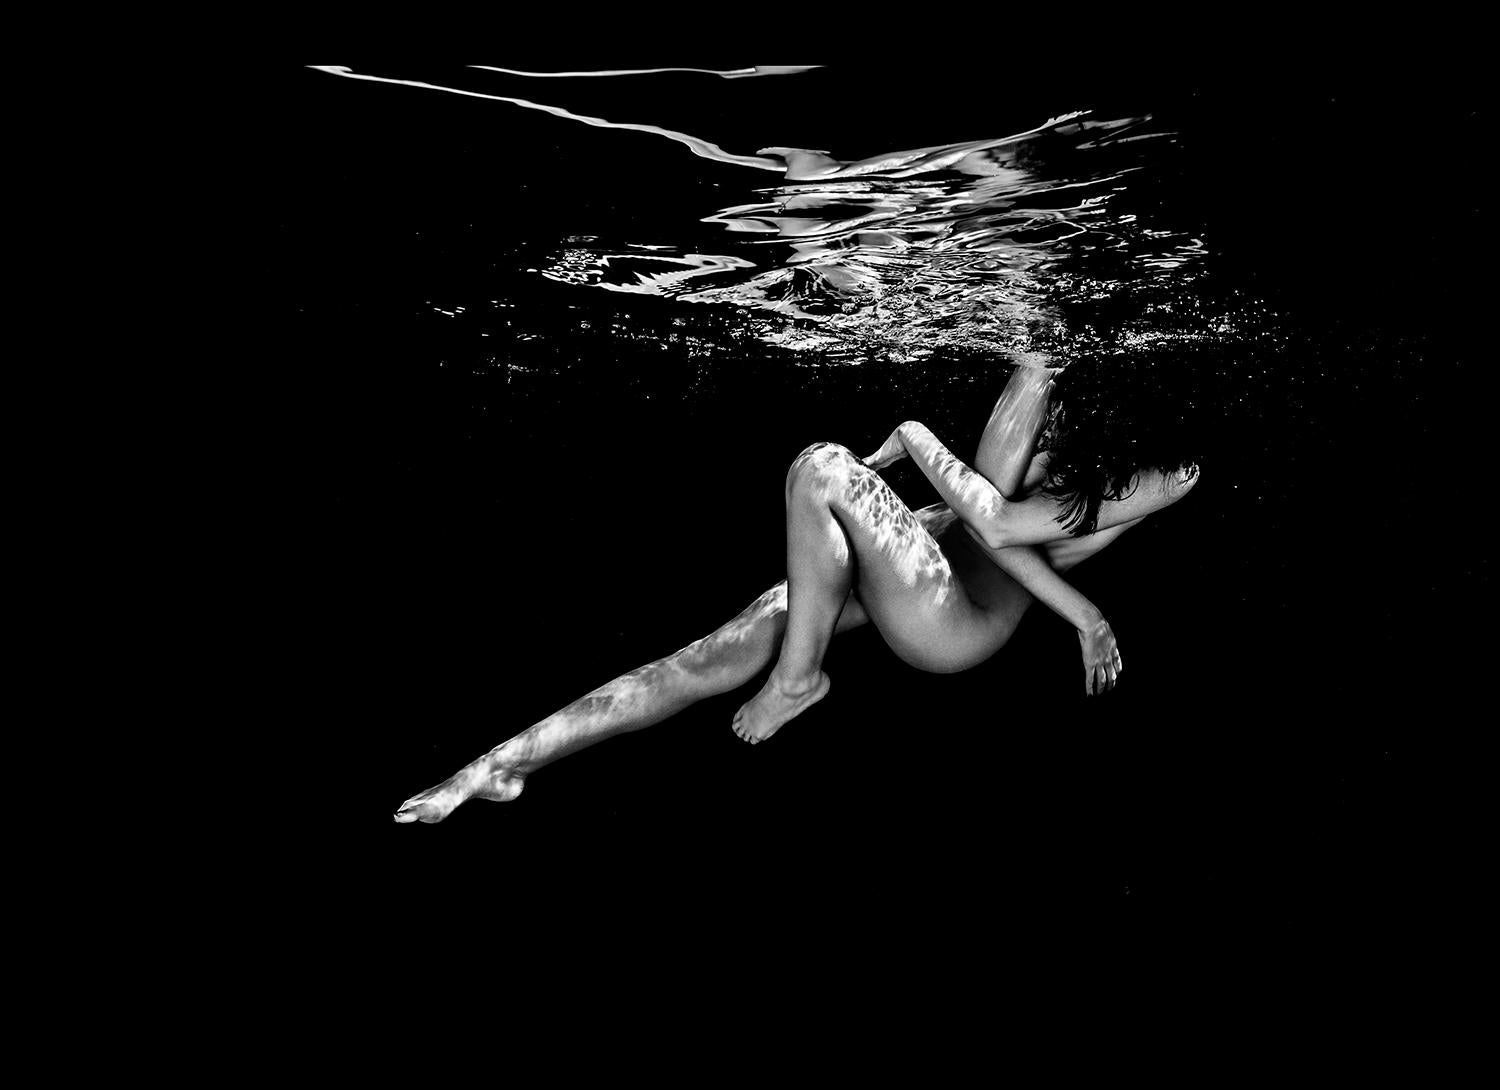 Alex Sher Black and White Photograph - Night Flight - underwater black & white nude photograph - print on paper 17"x23"